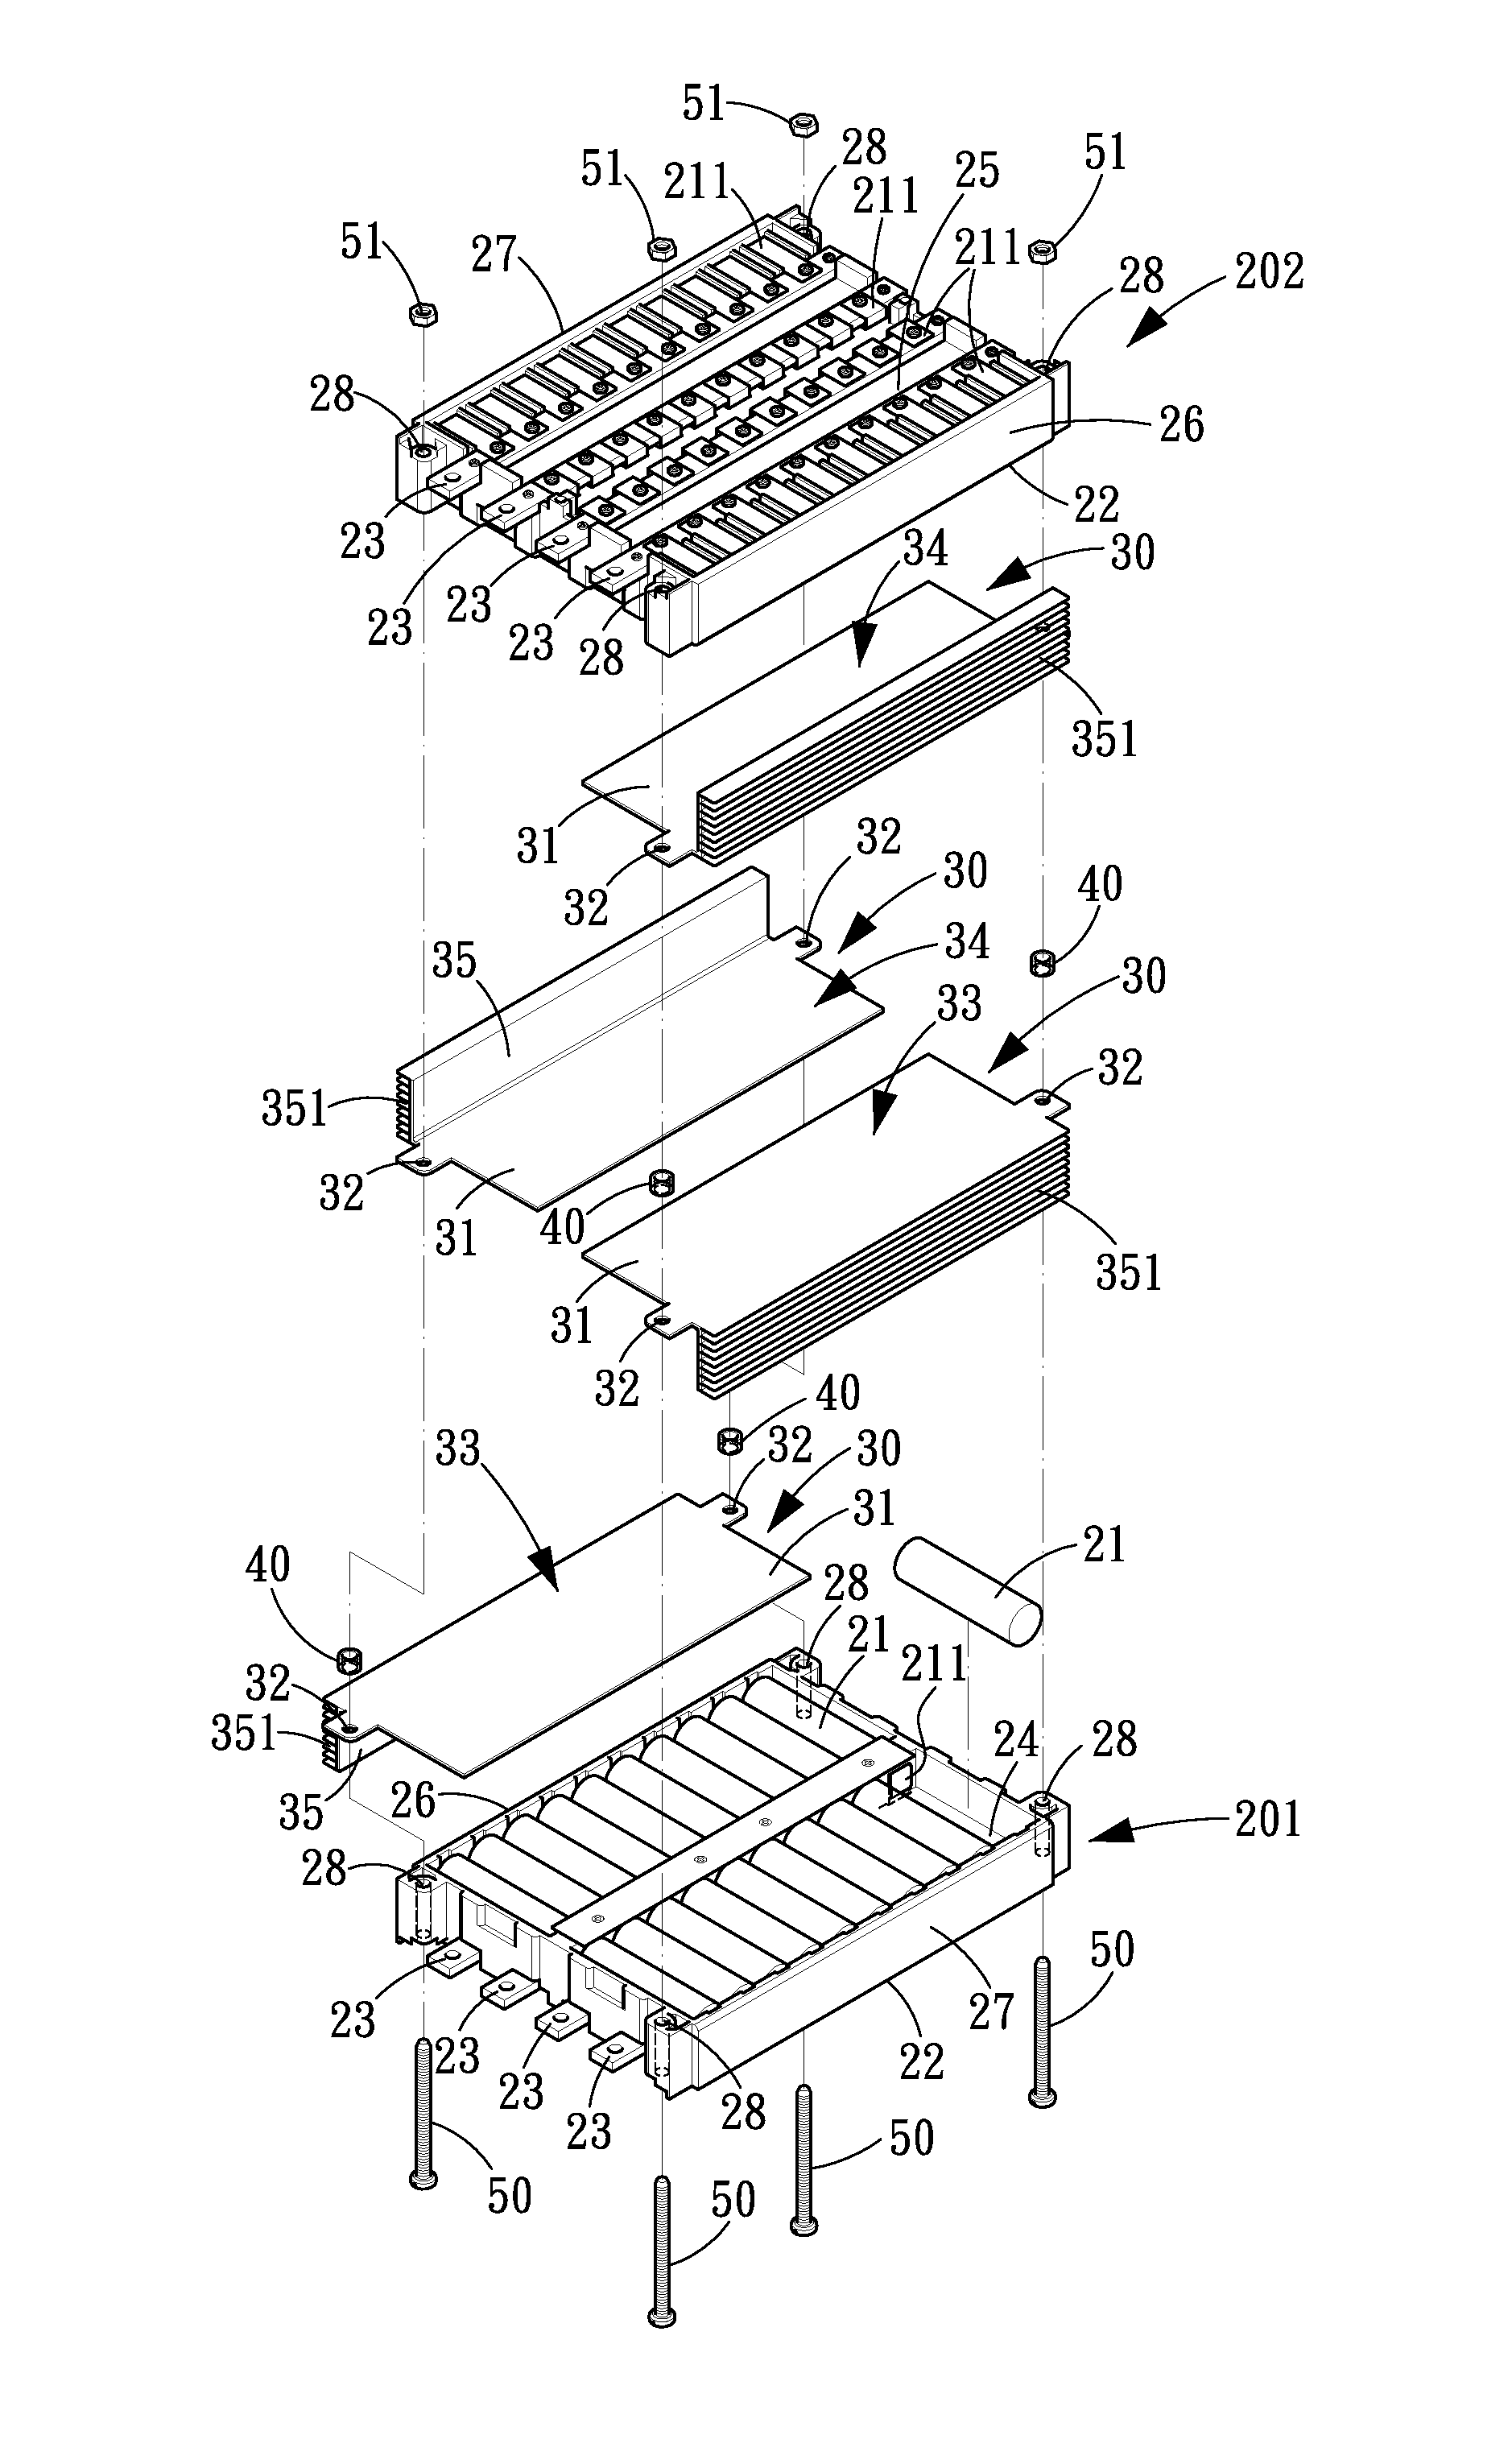 Battery pack with a heat dissipation structure